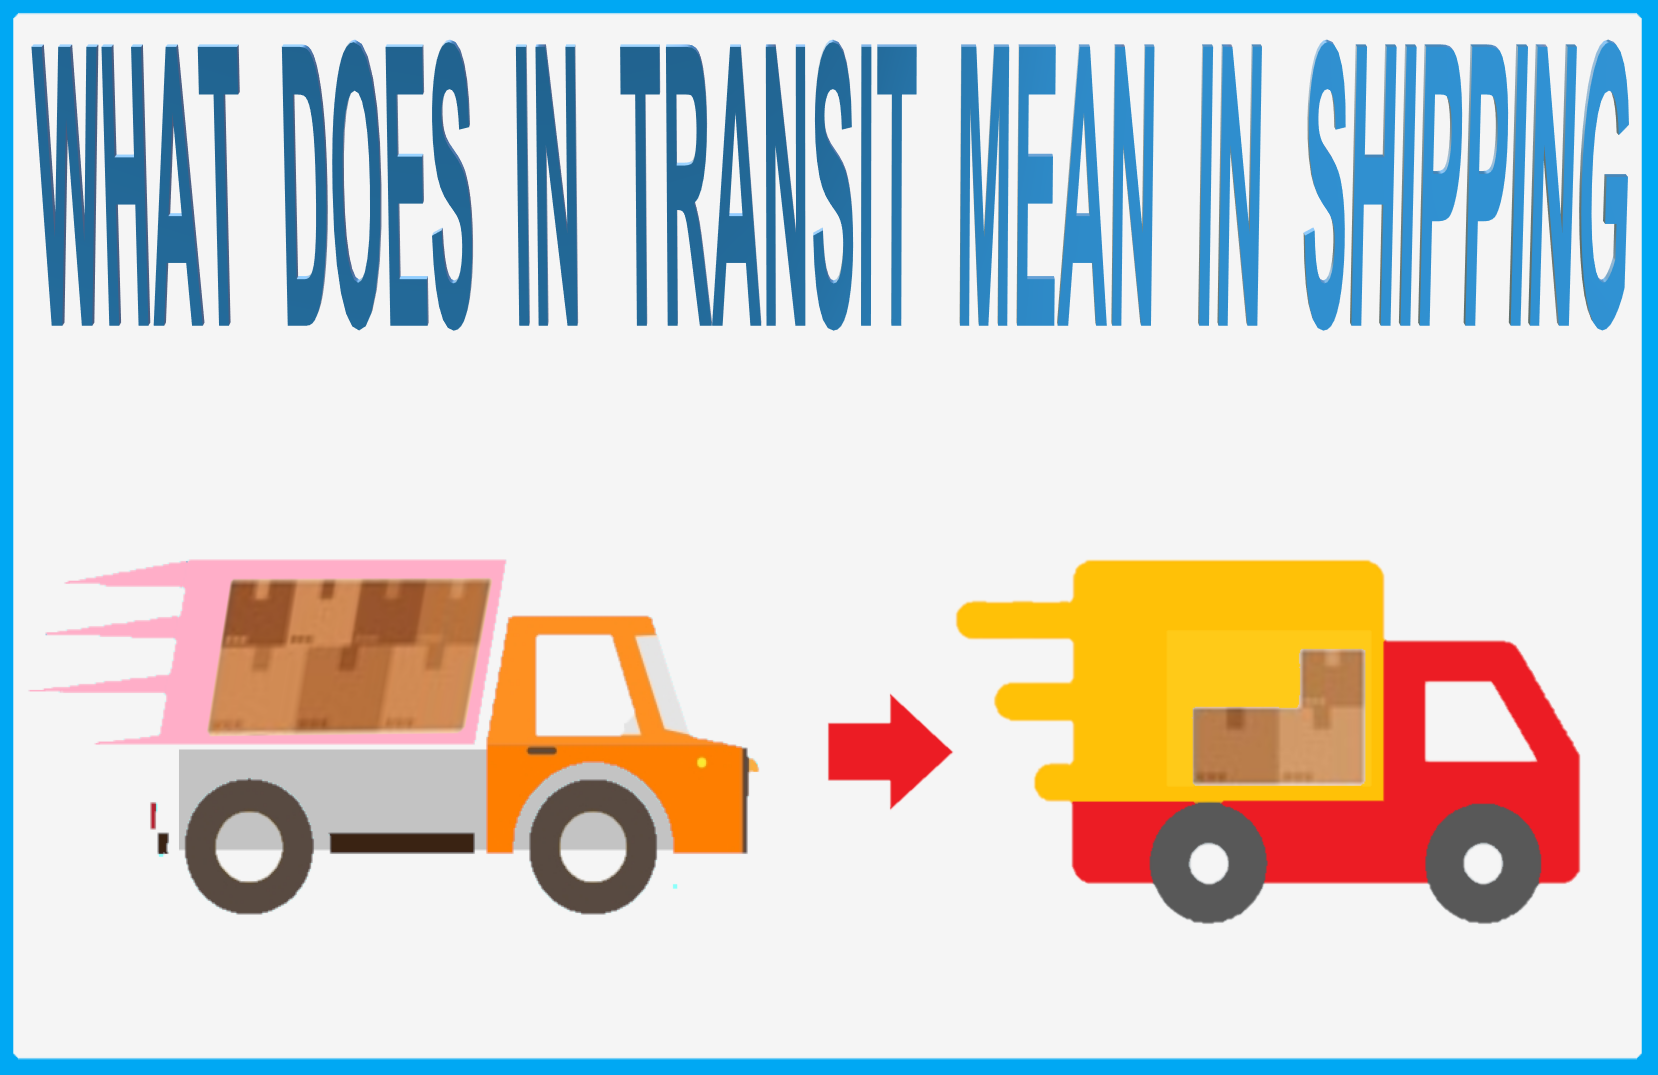 What does in transit time means in shipping